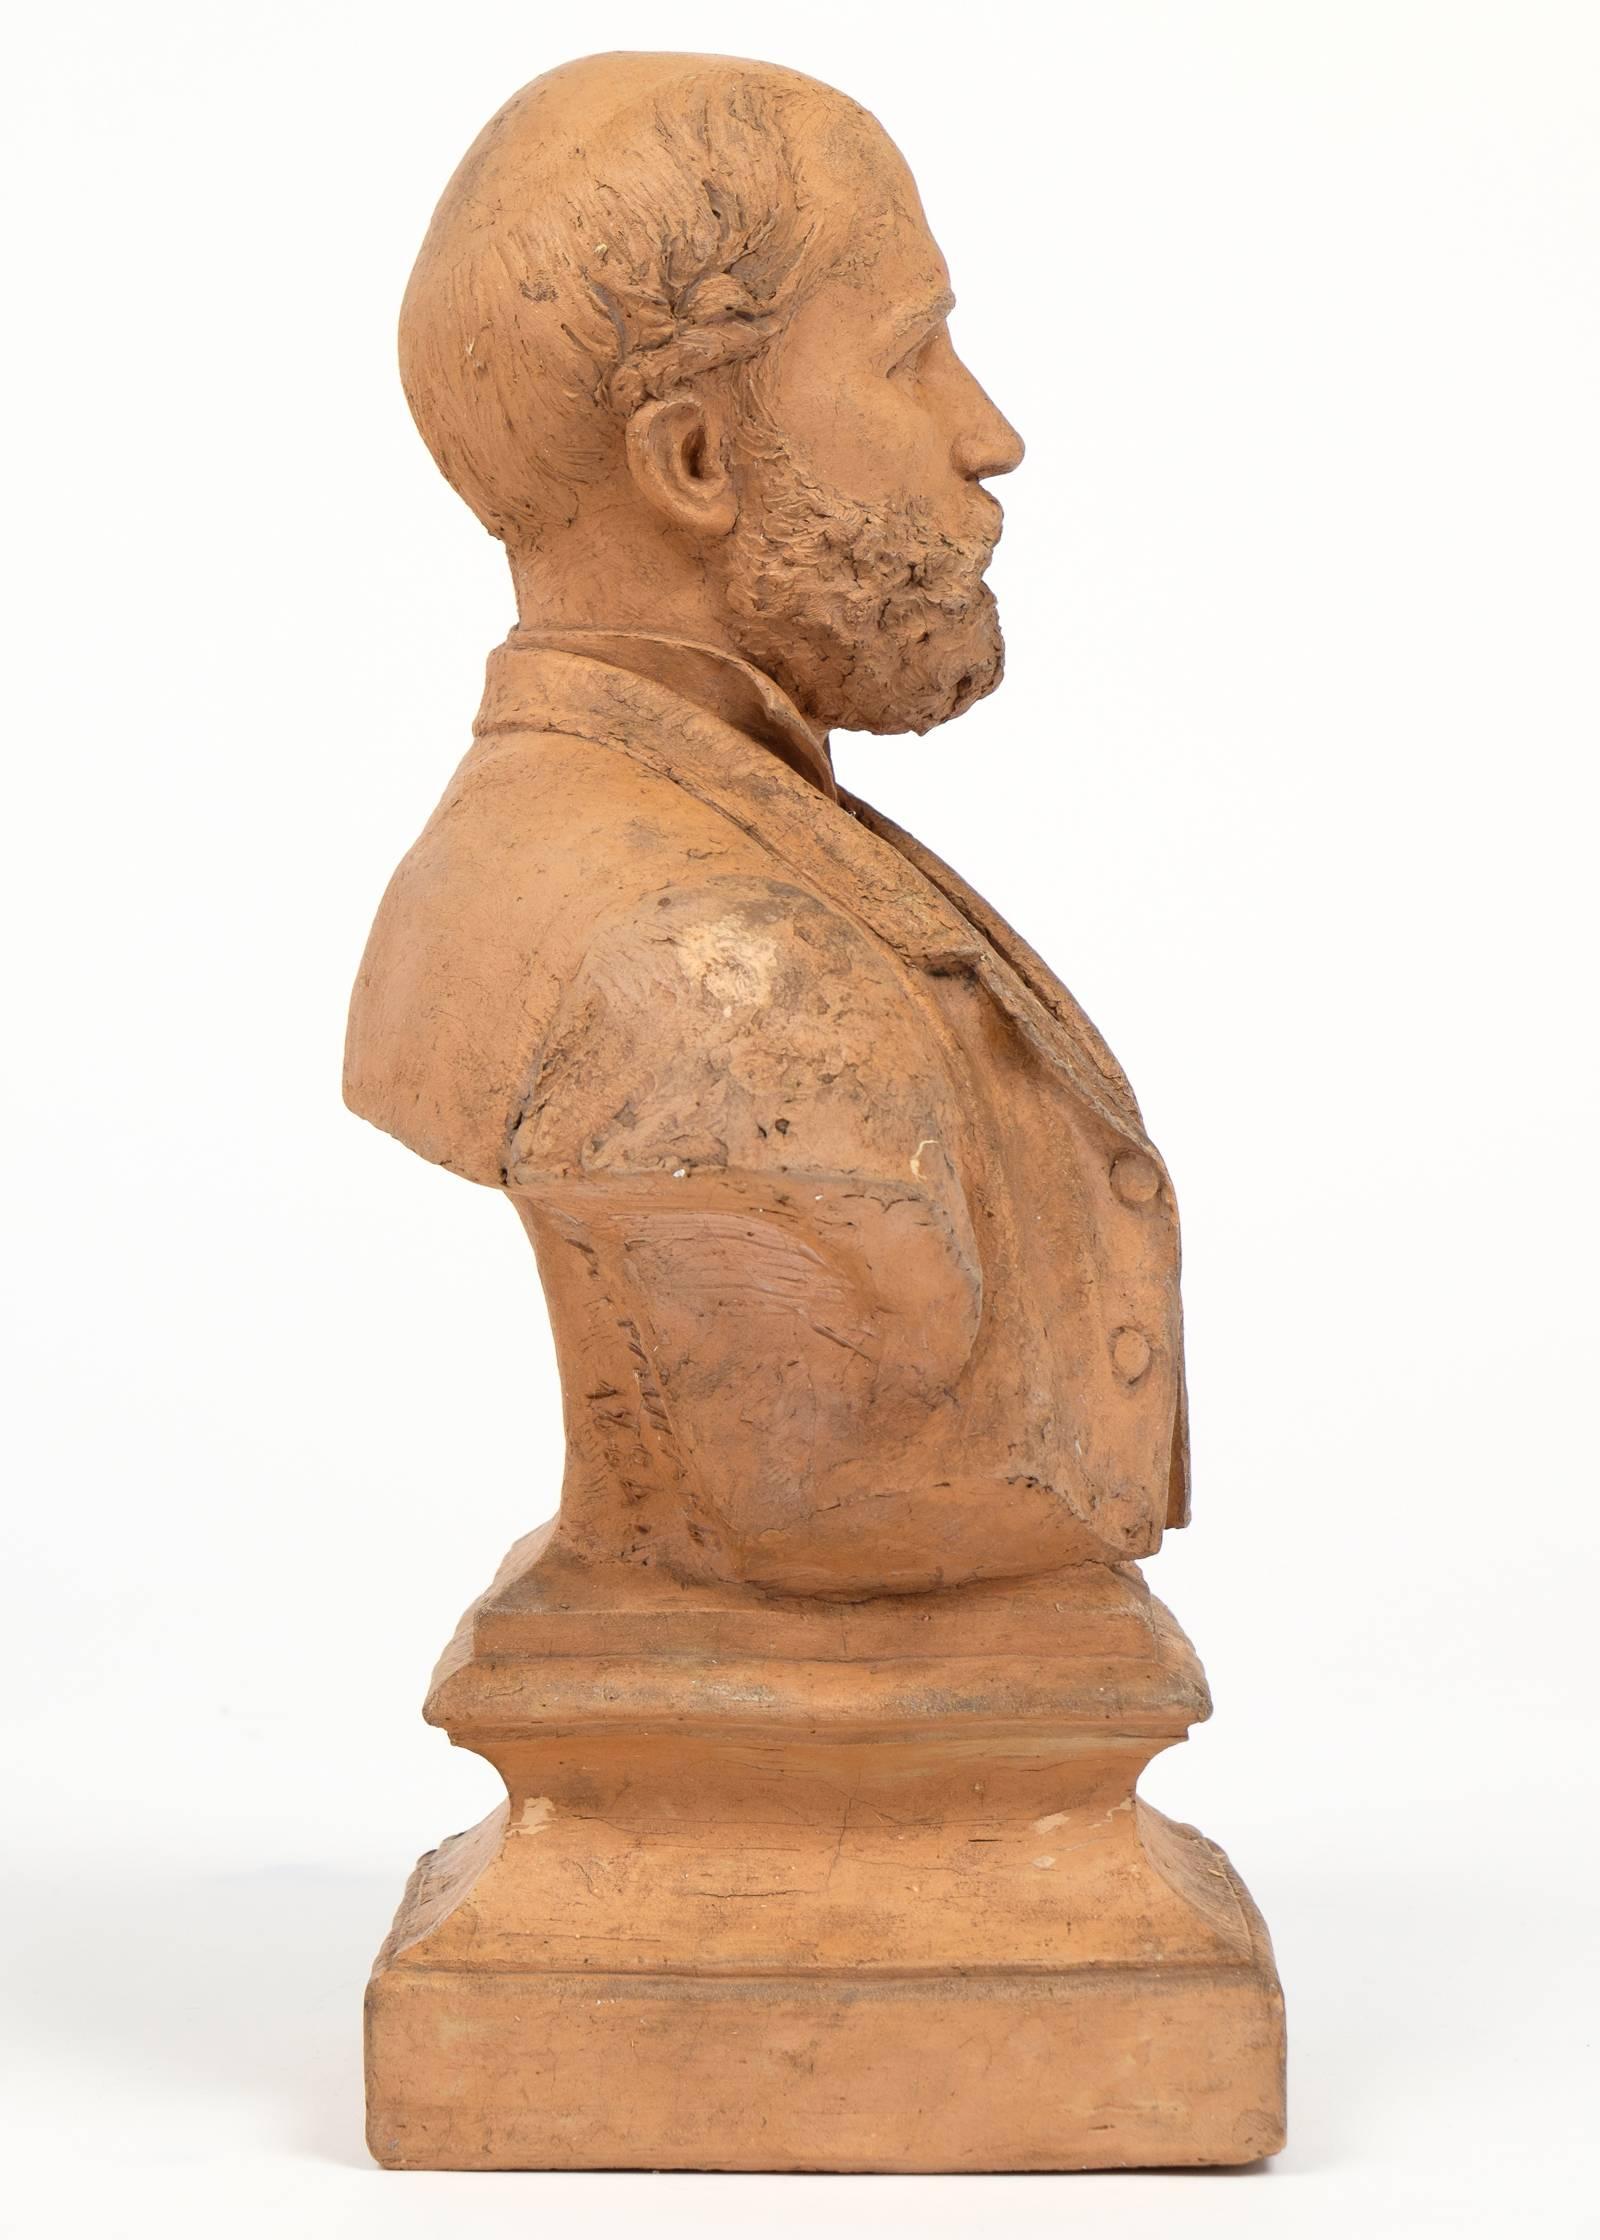 Terracotta 19th Century French Bust Sculpture of a Gentleman